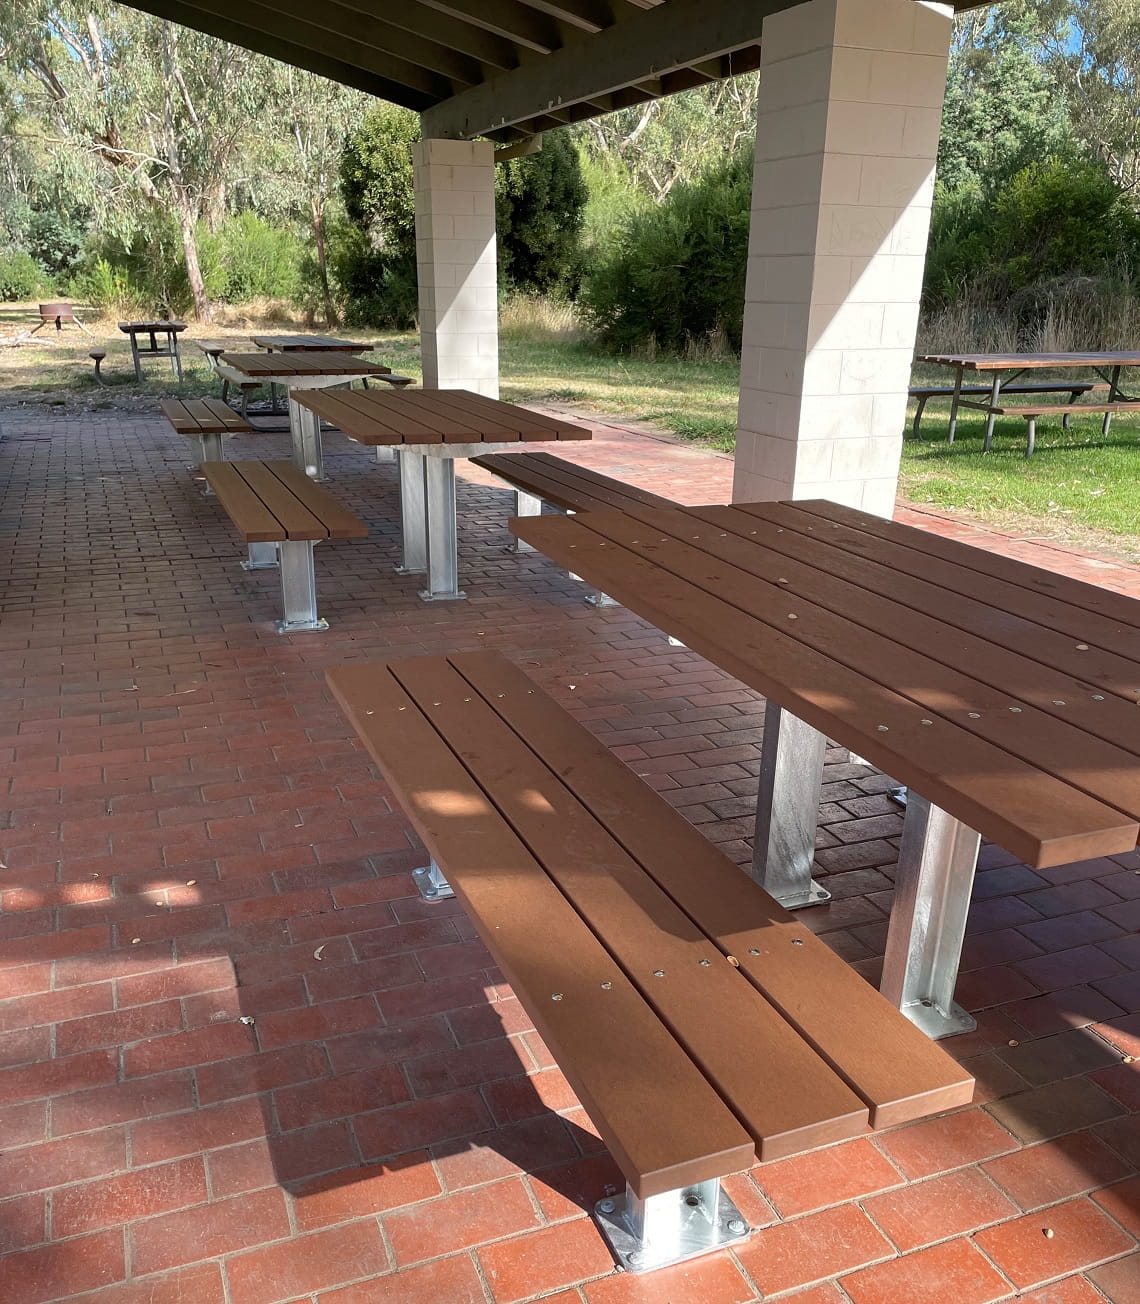 New picnic tables installed at Birrarung Park. There are three tables in a row, sitting on top of a red brick surface, underneath a large picnic shelter.